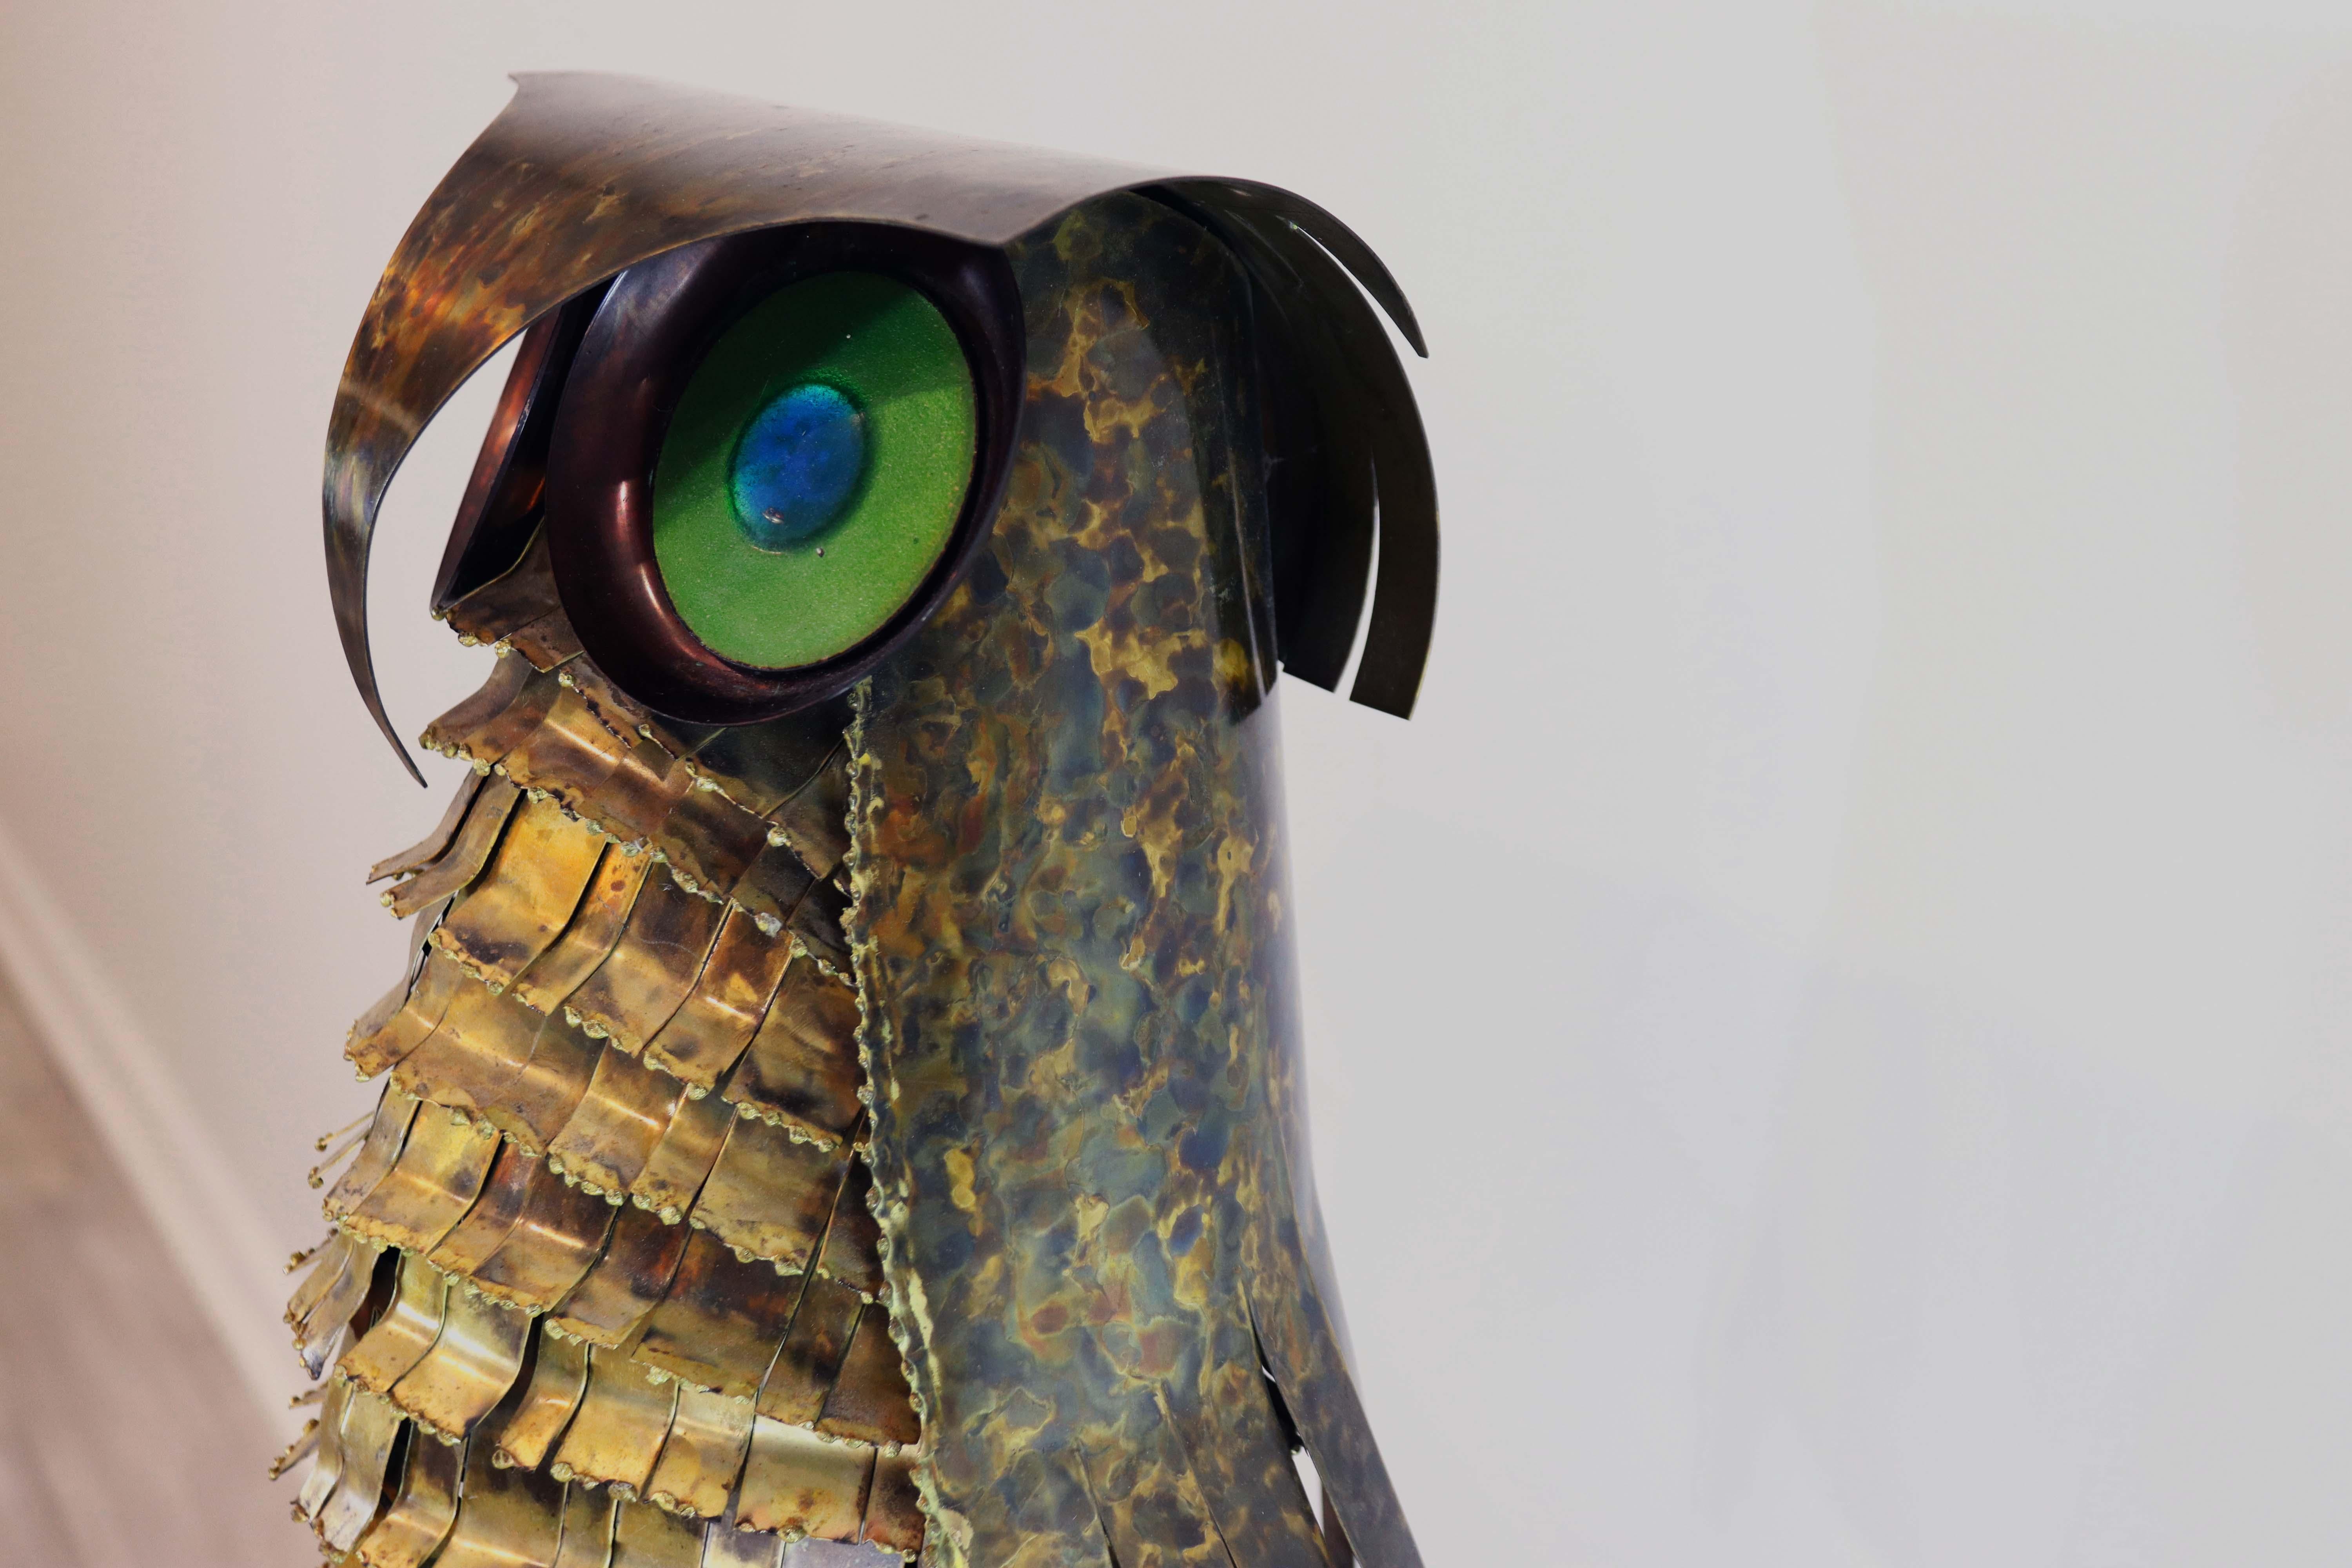 Richly patinated, this brass torch cut metal owl sculpture with detailed with multi color enameled eyes is exemplary work of Curtis Jere. 

Well known to many for producing some of the most iconic metal work, art and sculpture in the mid century,